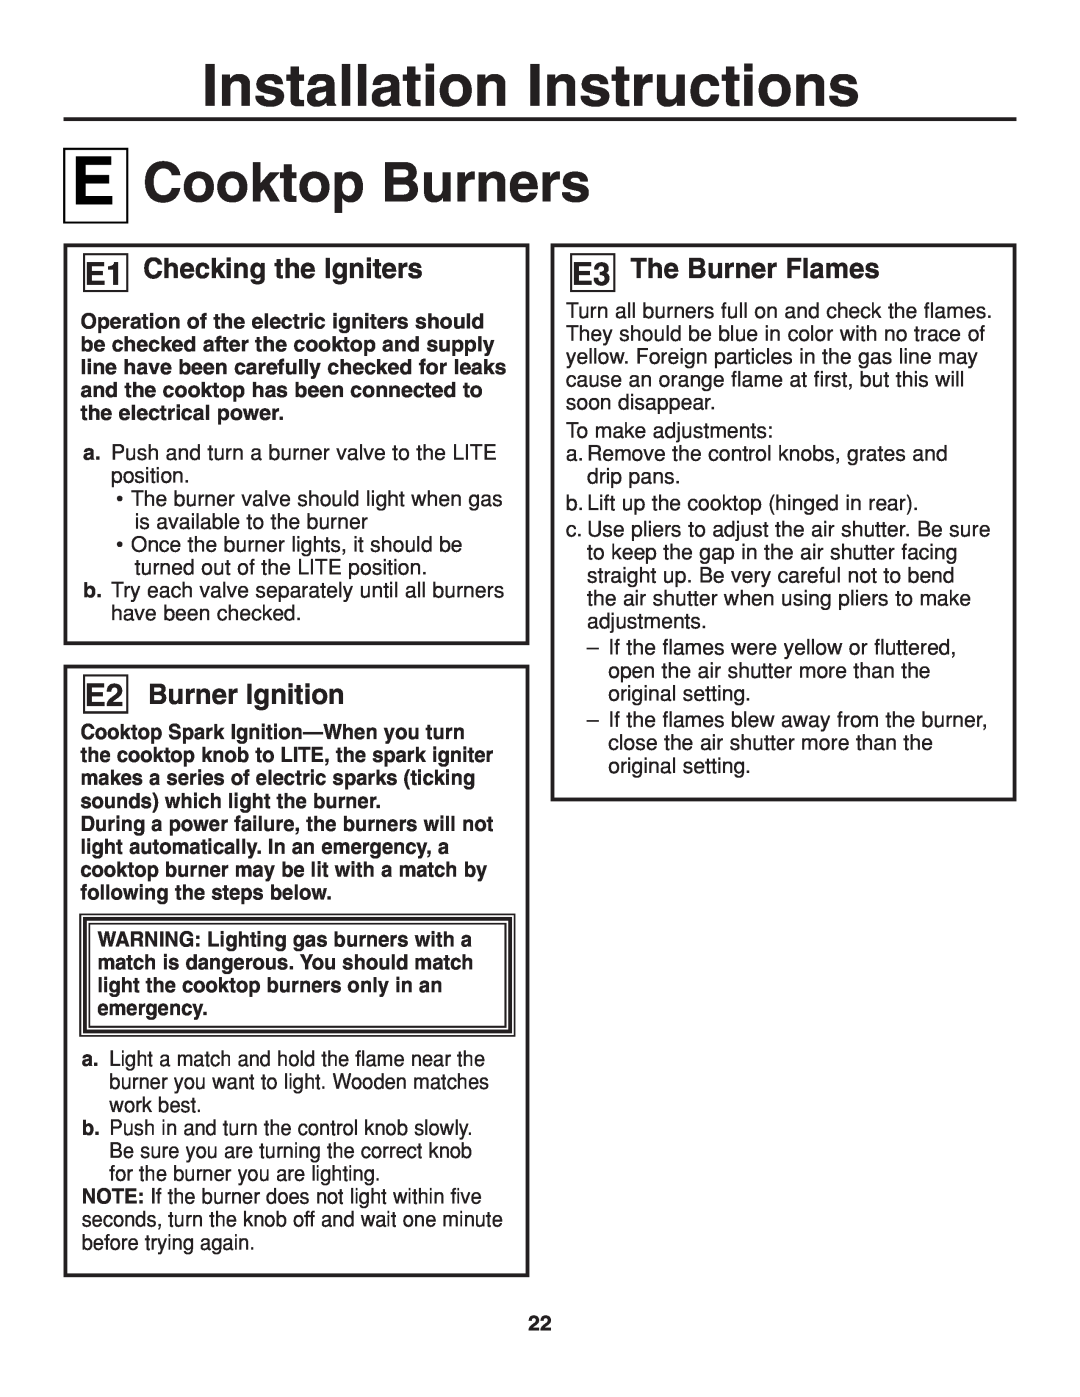 GE JGP319 Cooktop Burners, E1 Checking the Igniters, E2 Burner Ignition, E3 The Burner Flames, Installation Instructions 